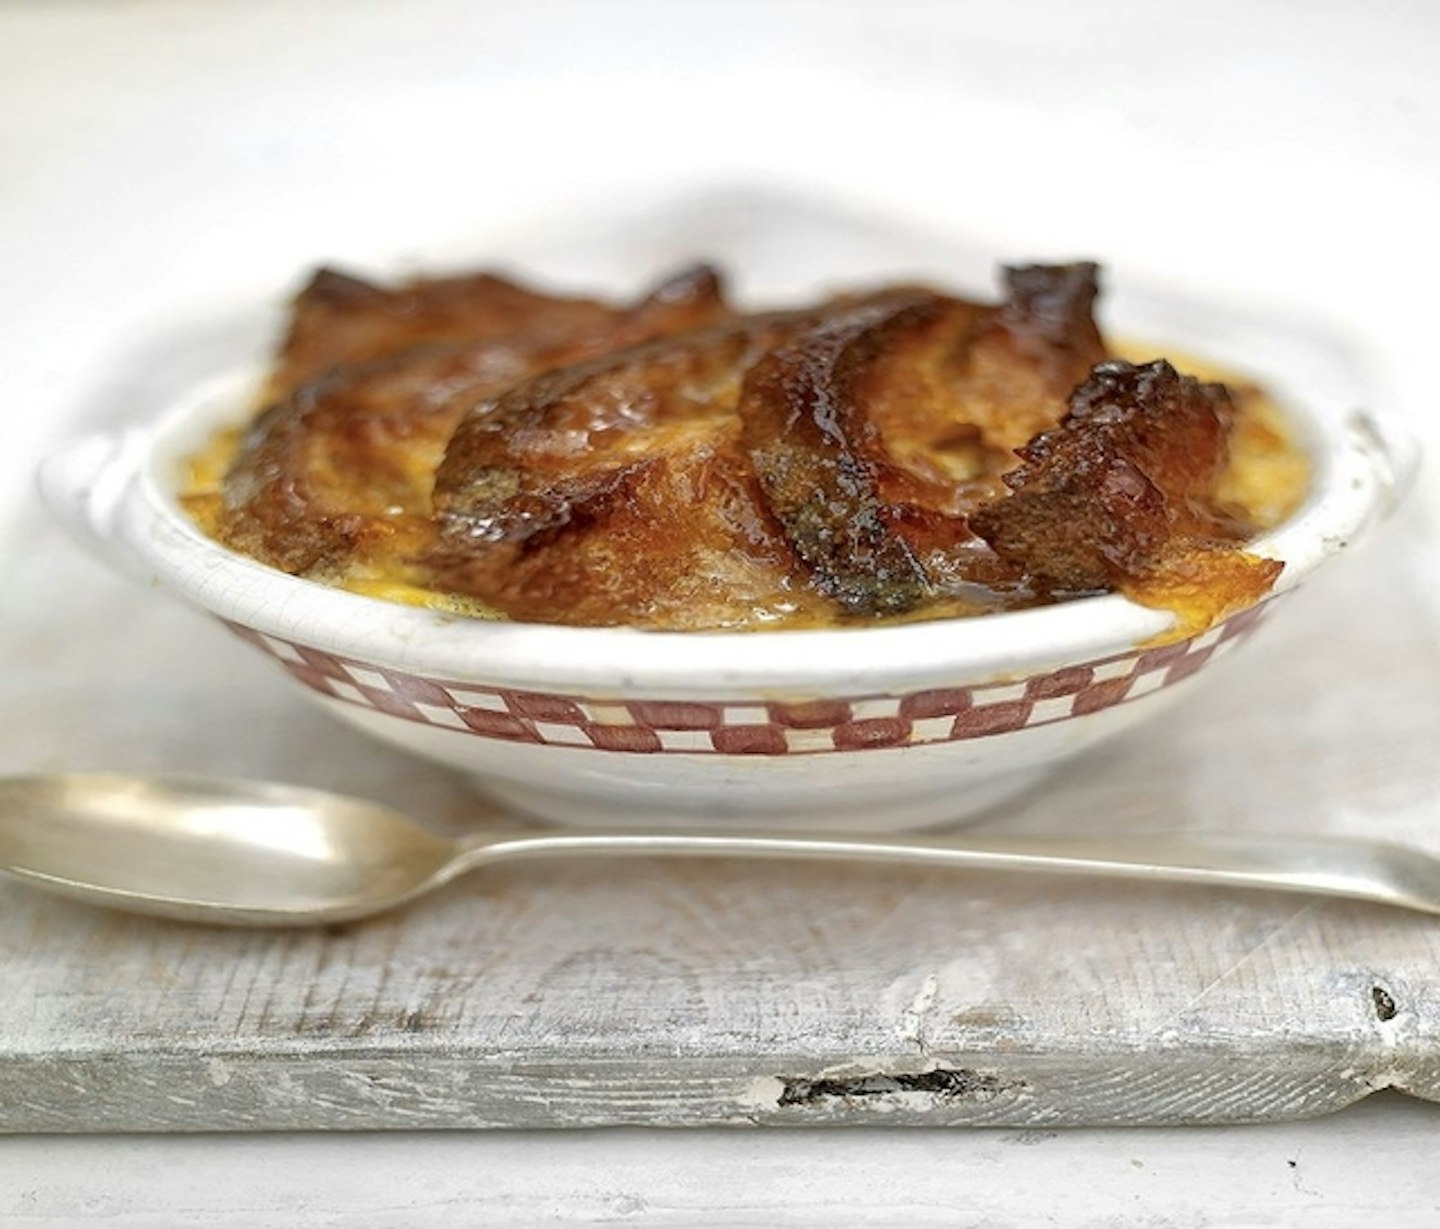 Jamie Oliver bread and butter pudding with marmalade